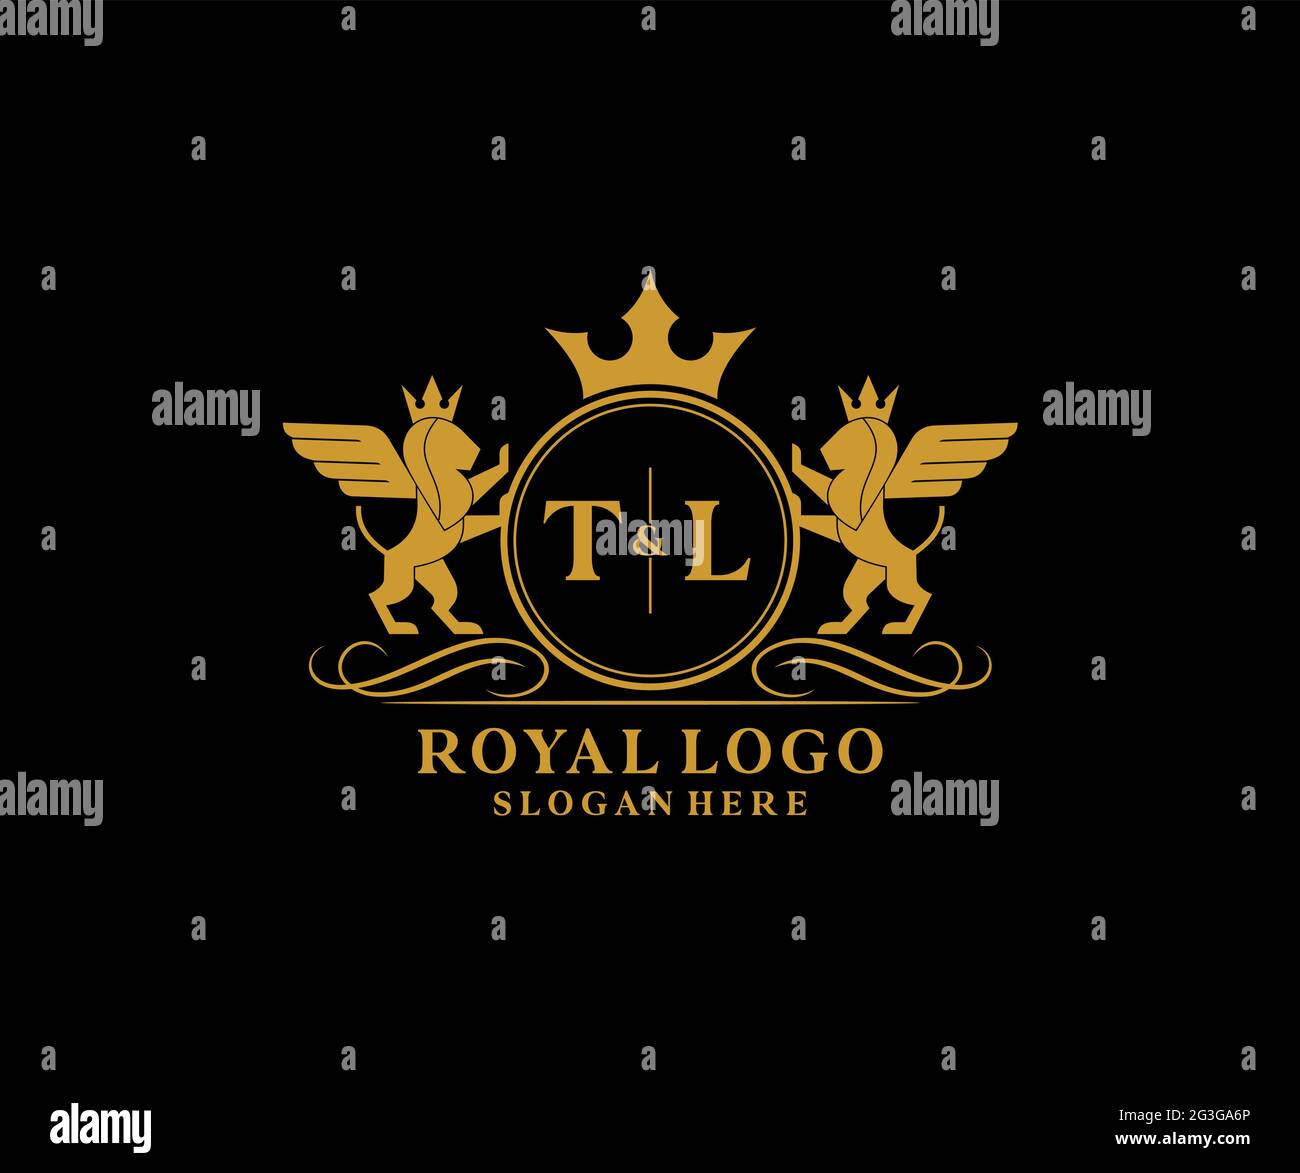 TL Letter Lion Royal Luxury Heraldic,Crest Logo template in vector art for Restaurant, Royalty, Boutique, Cafe, Hotel, Heraldic, Jewelry, Fashion and Stock Vector